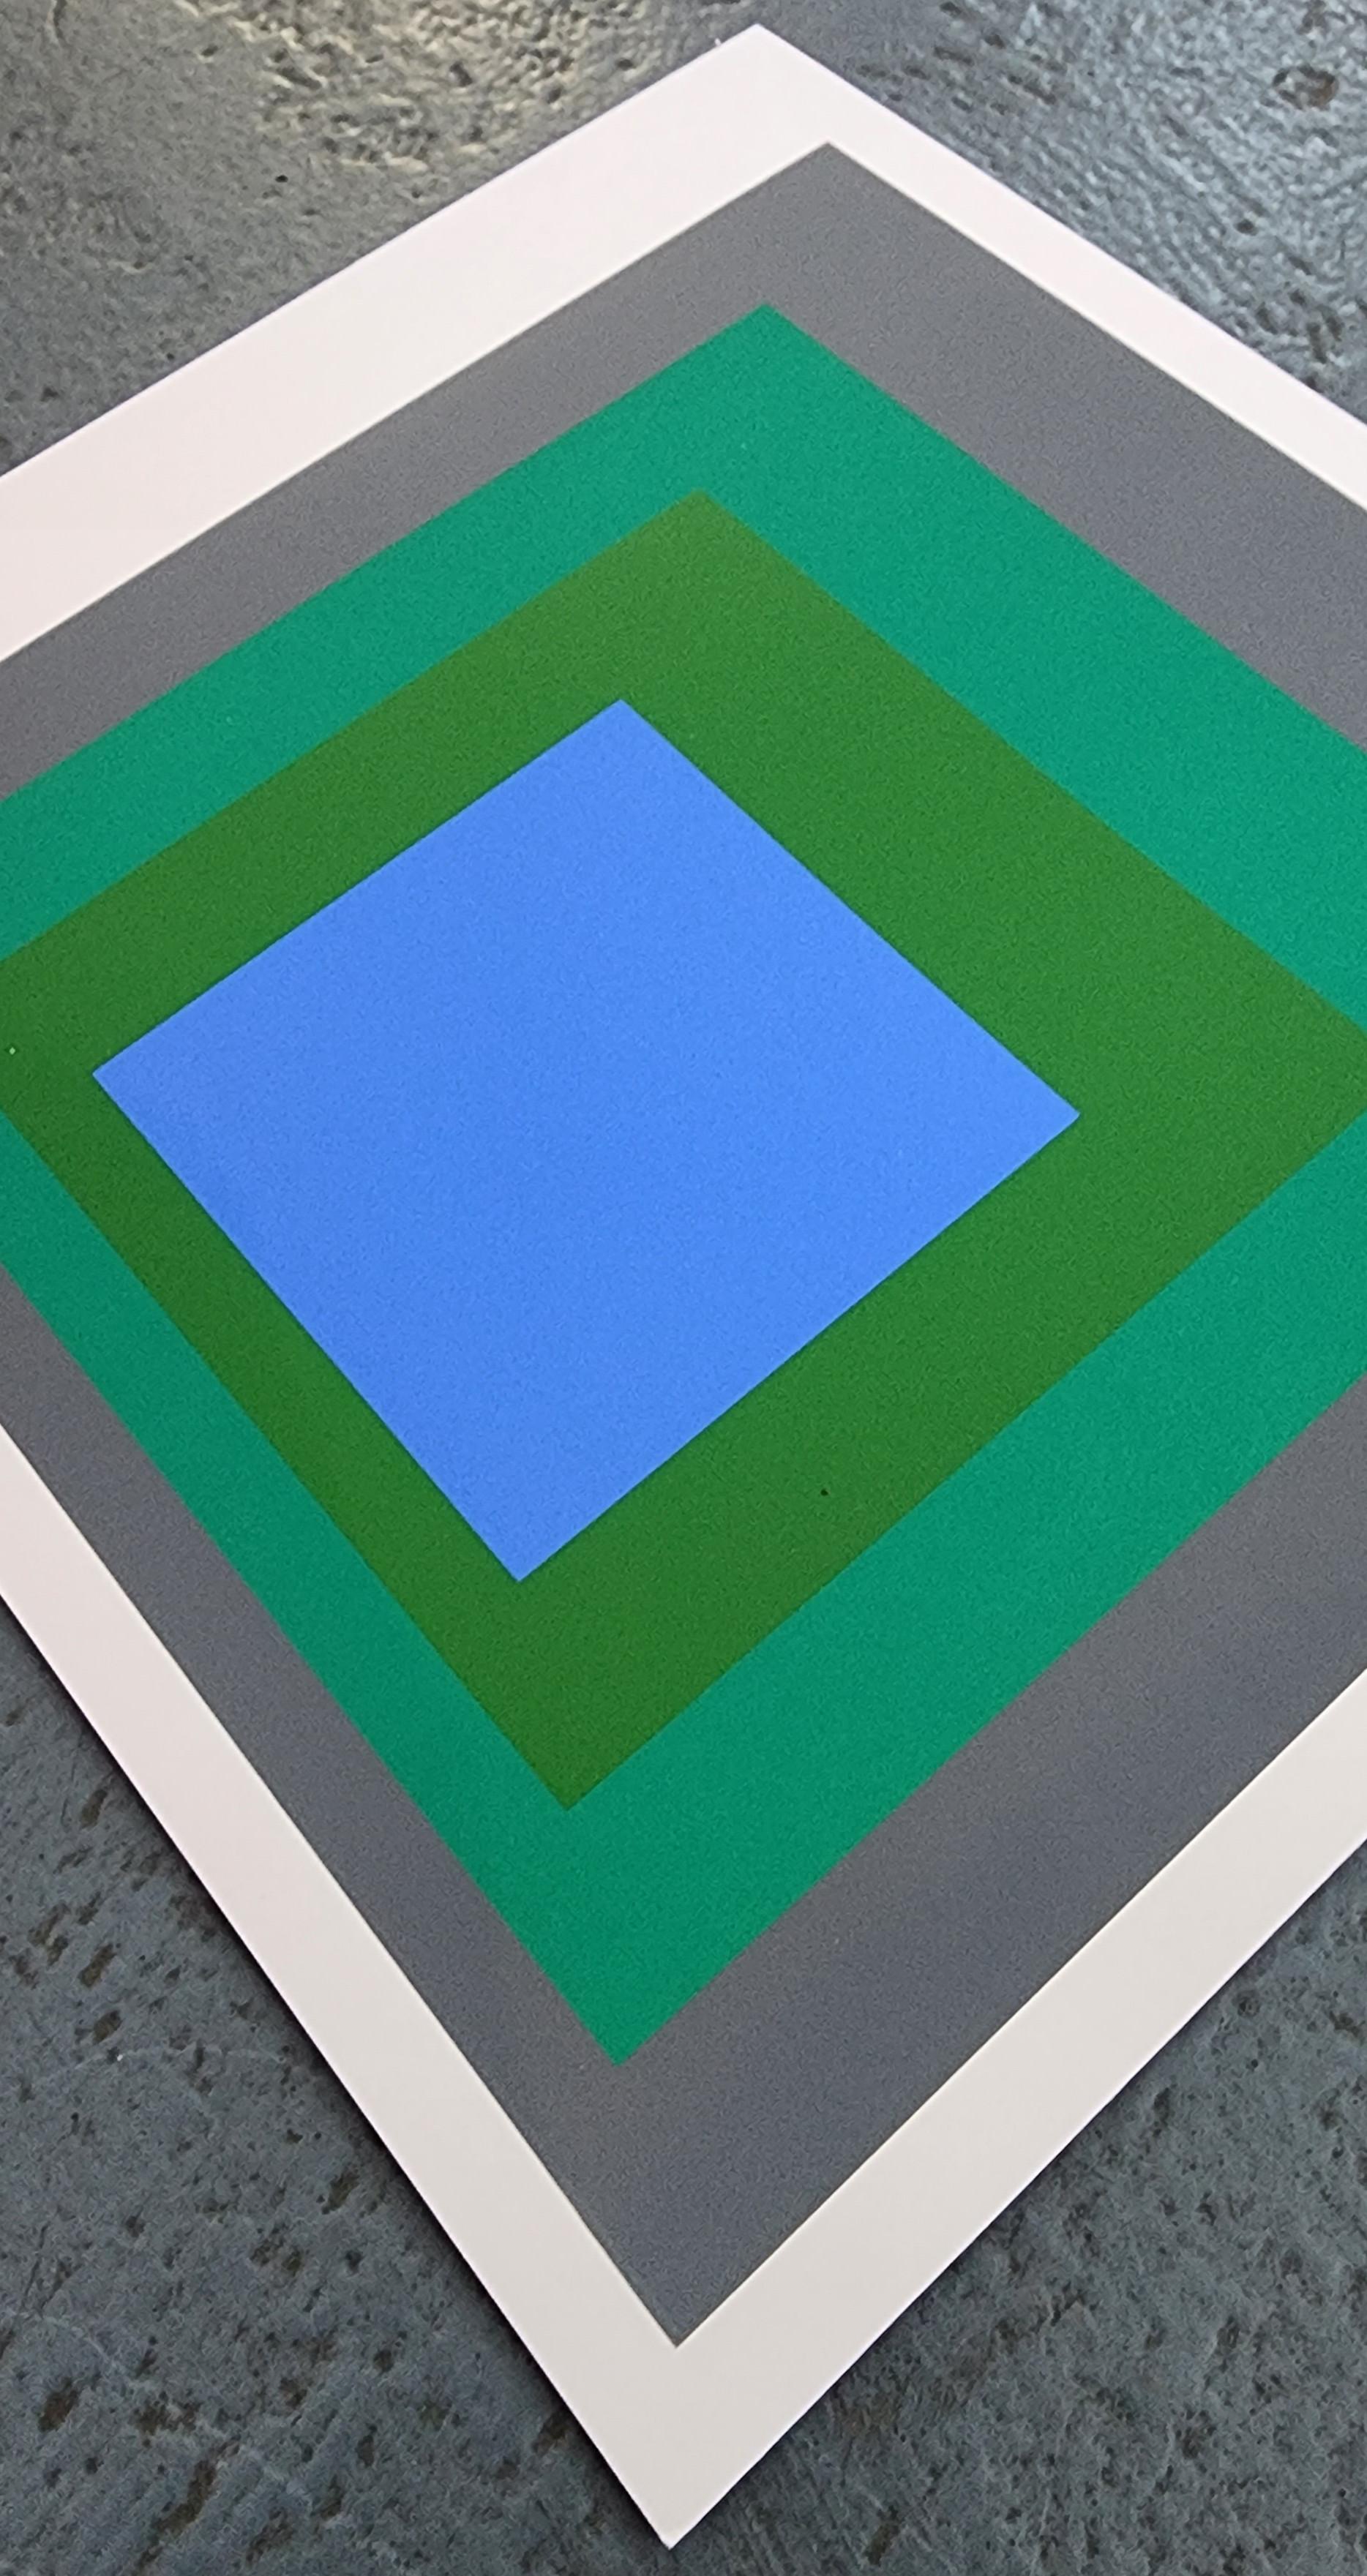 Josef Albers
Homage to the Square: Blue Look (from 